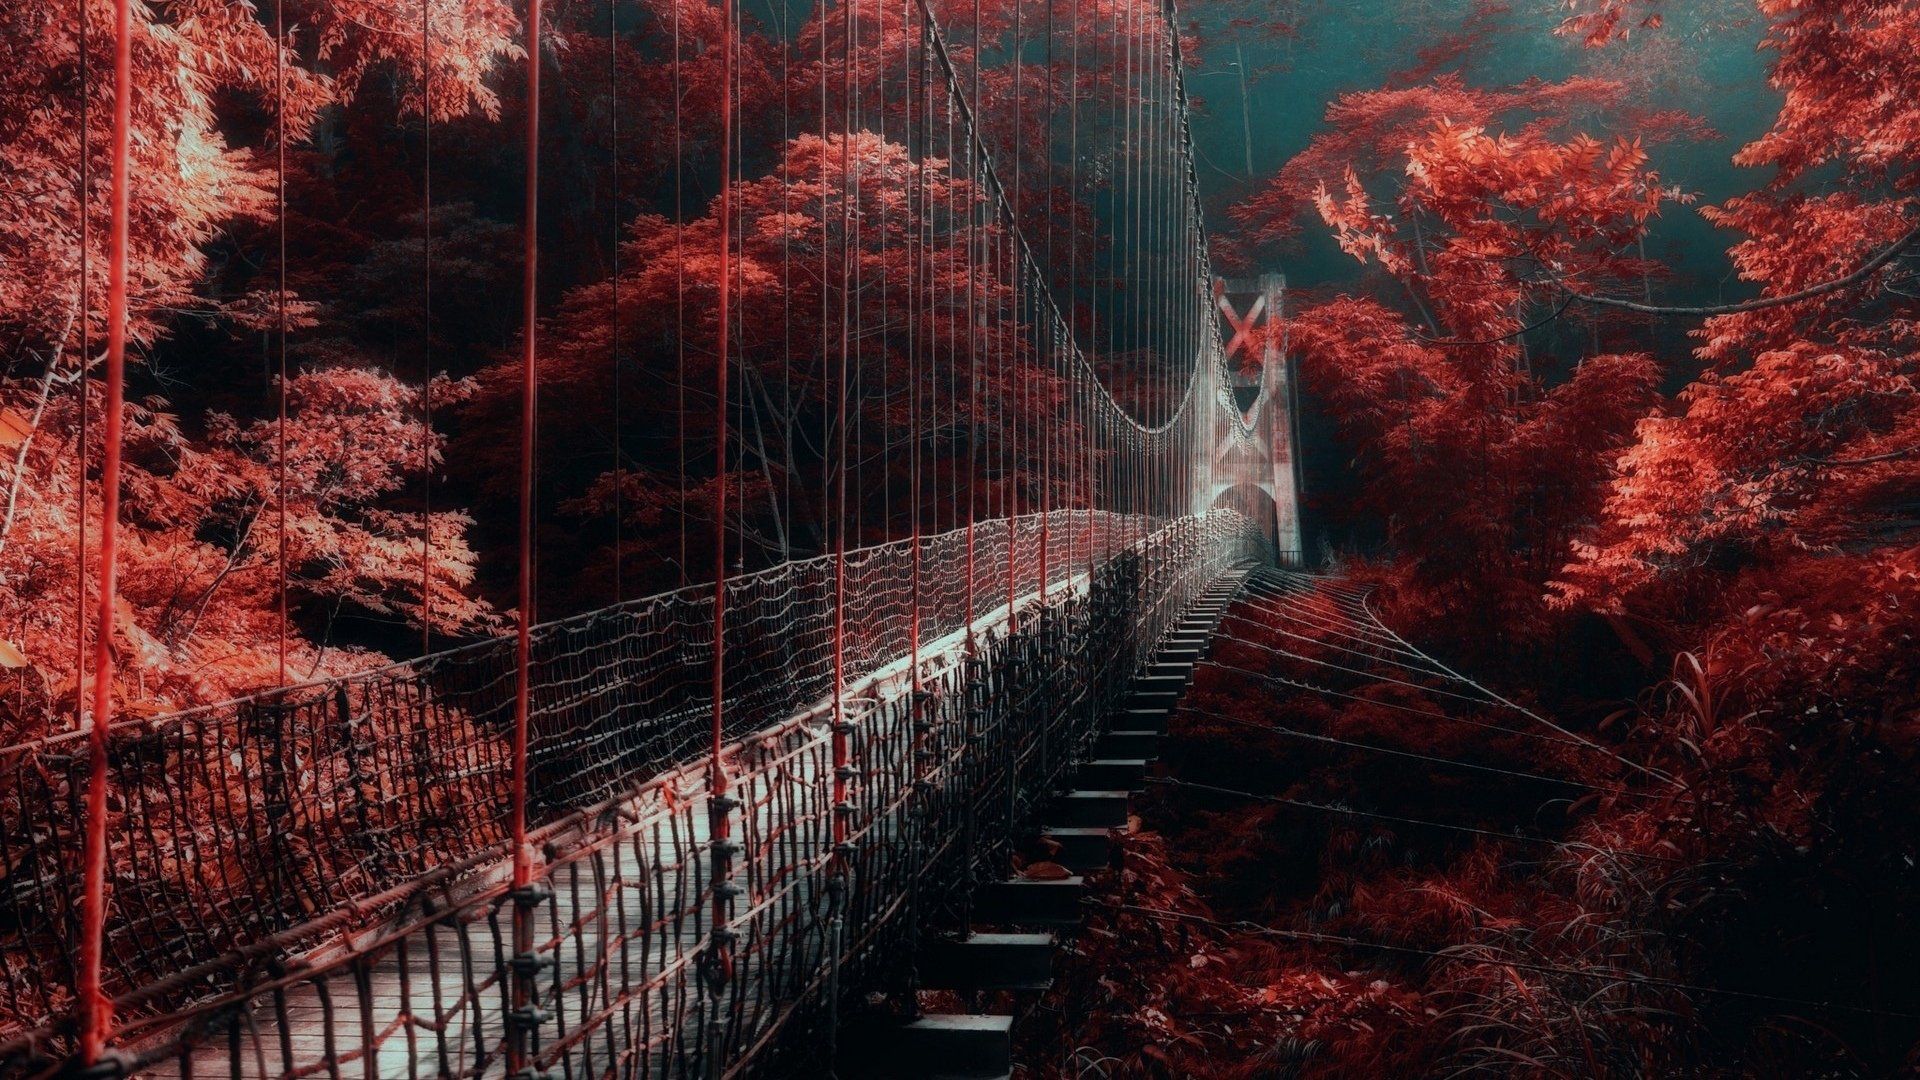 A bridge suspended over the forest with red trees - Dark